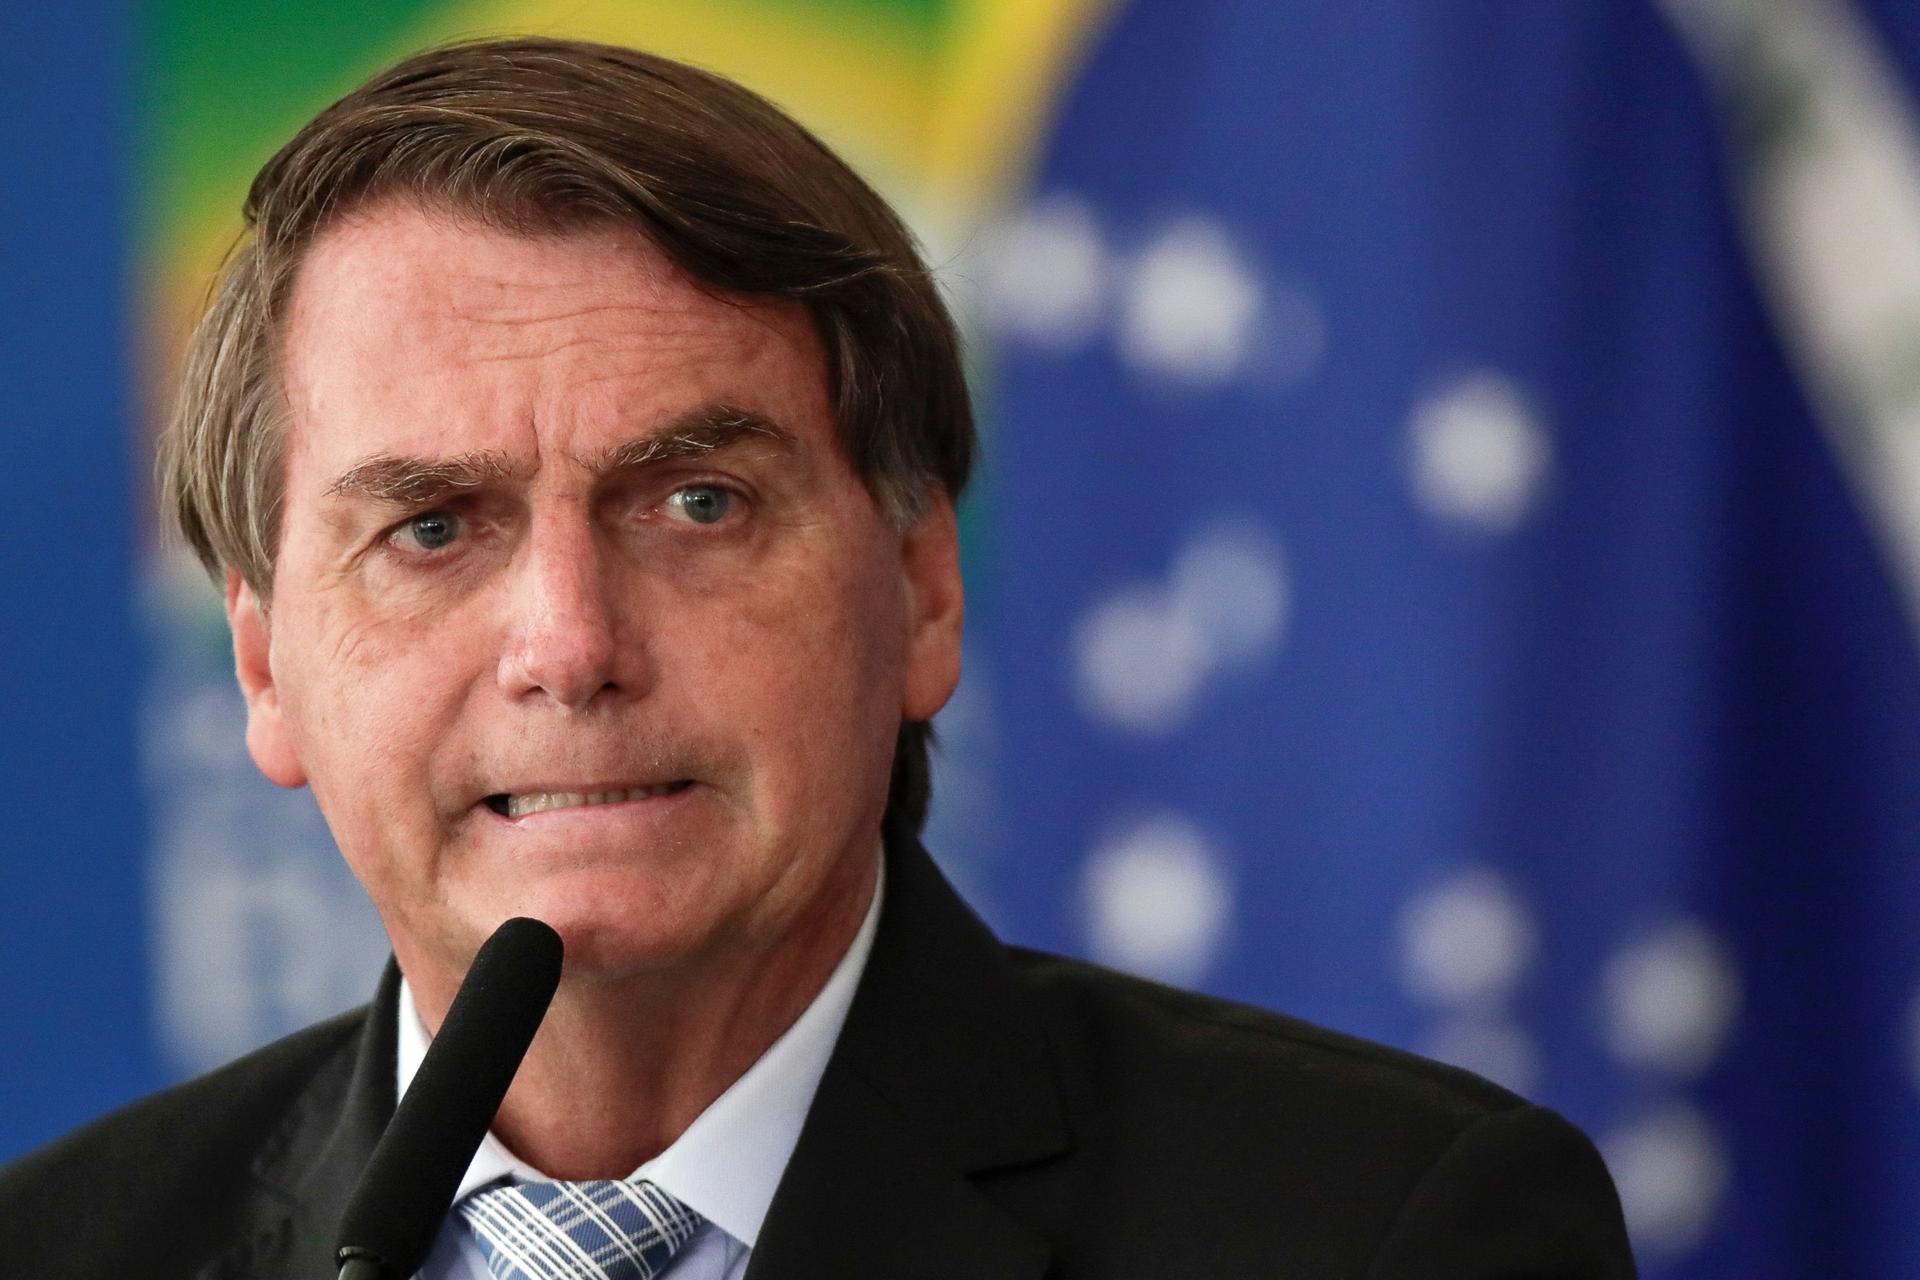 Human rights activists oppose Brazilian president’s praise of 1964 coup